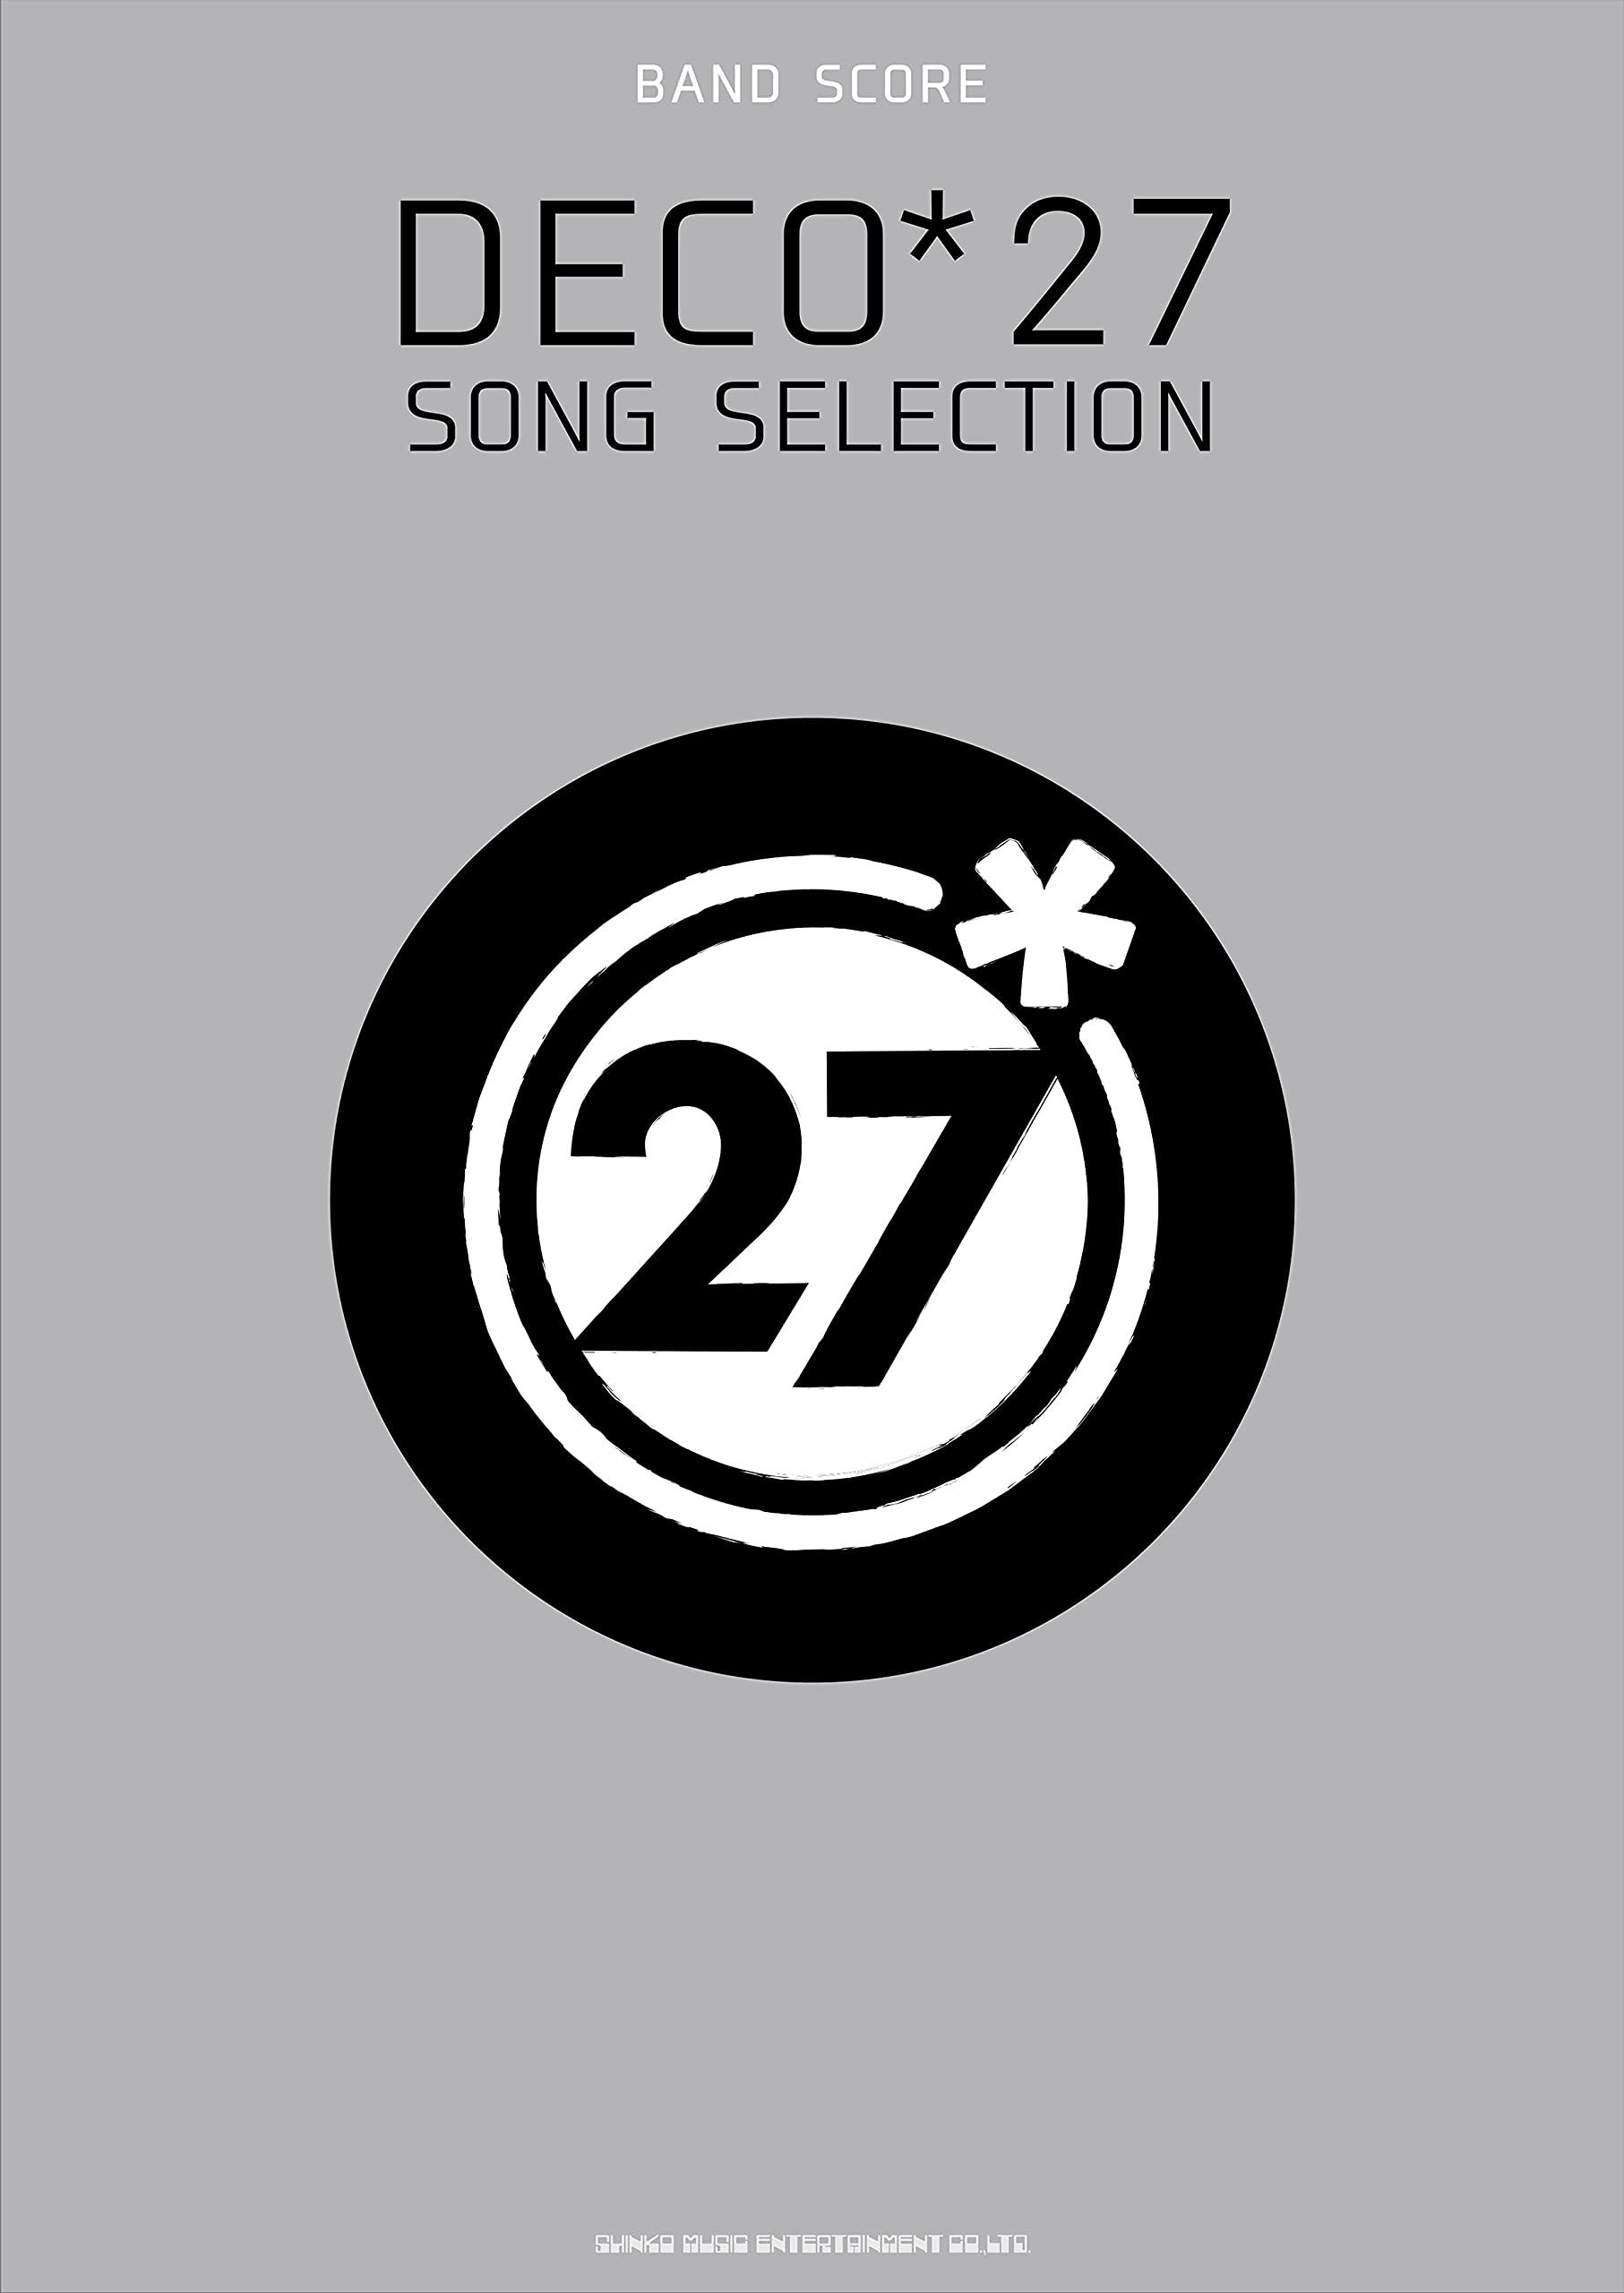 DECO*27 SONG SELECTION Band Score